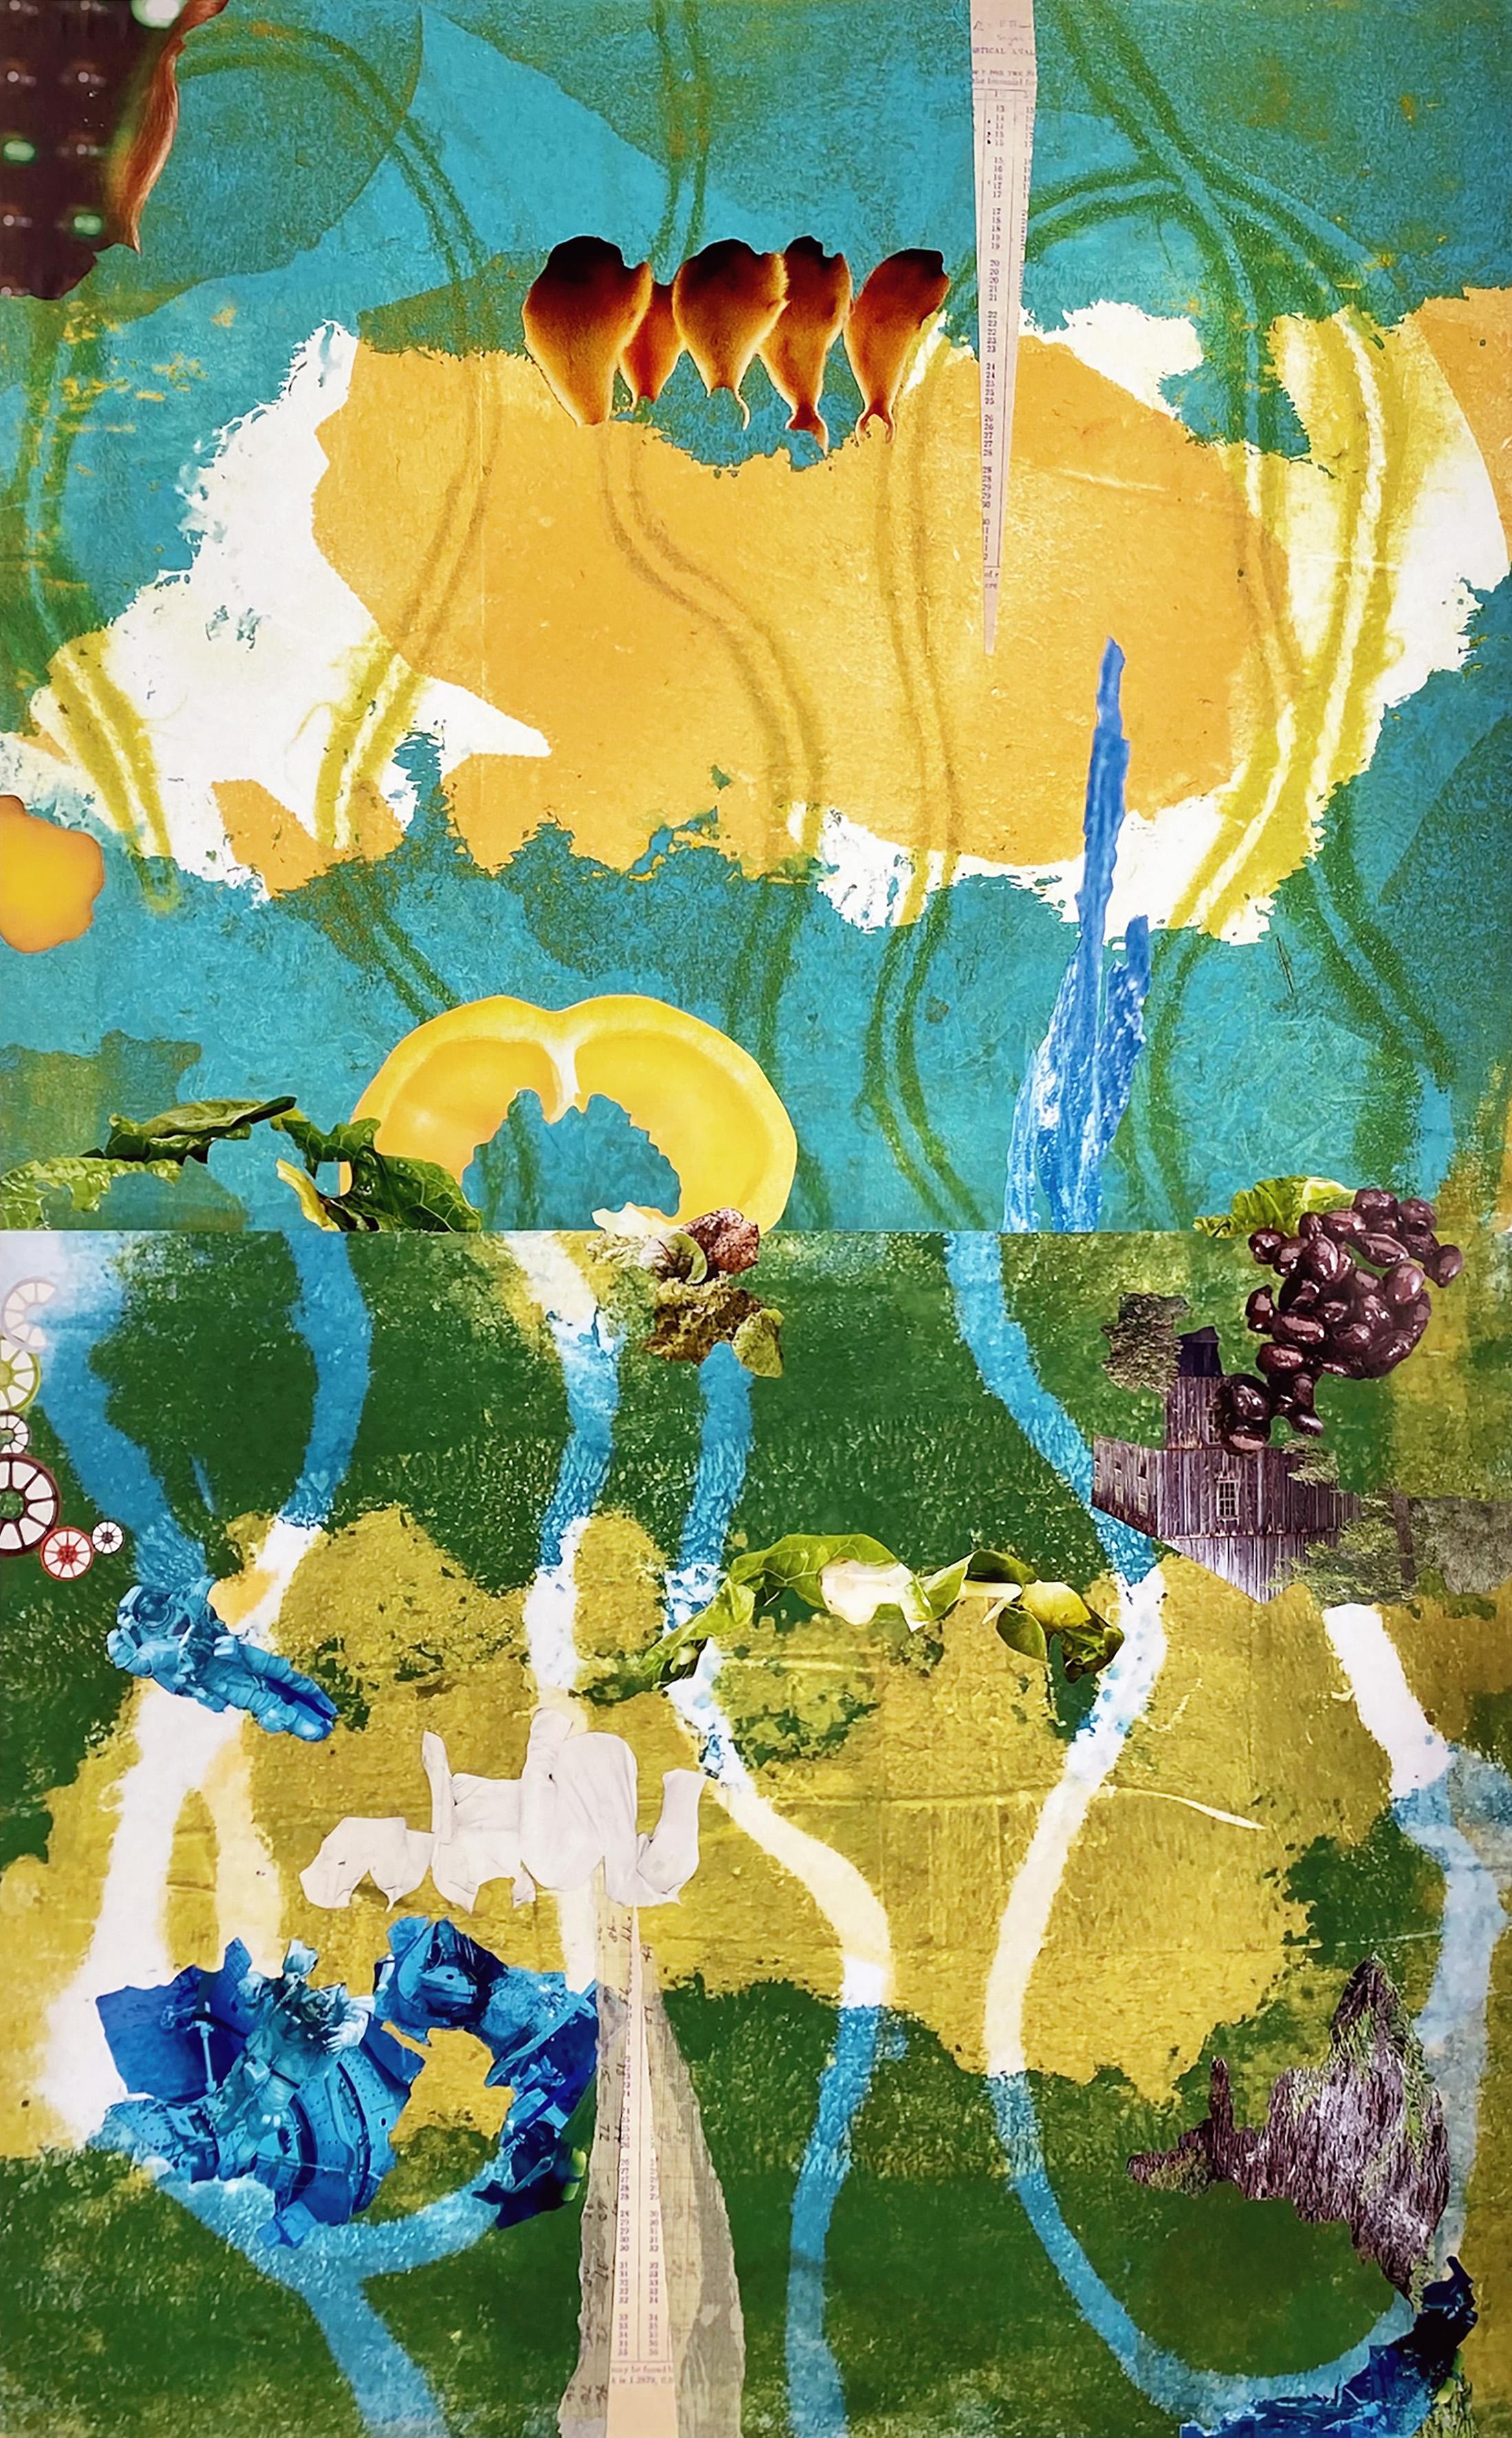 "Swinging against plumb", surreal, blue, yellow, green, collage, monoprints - Mixed Media Art by Monica DeSalvo